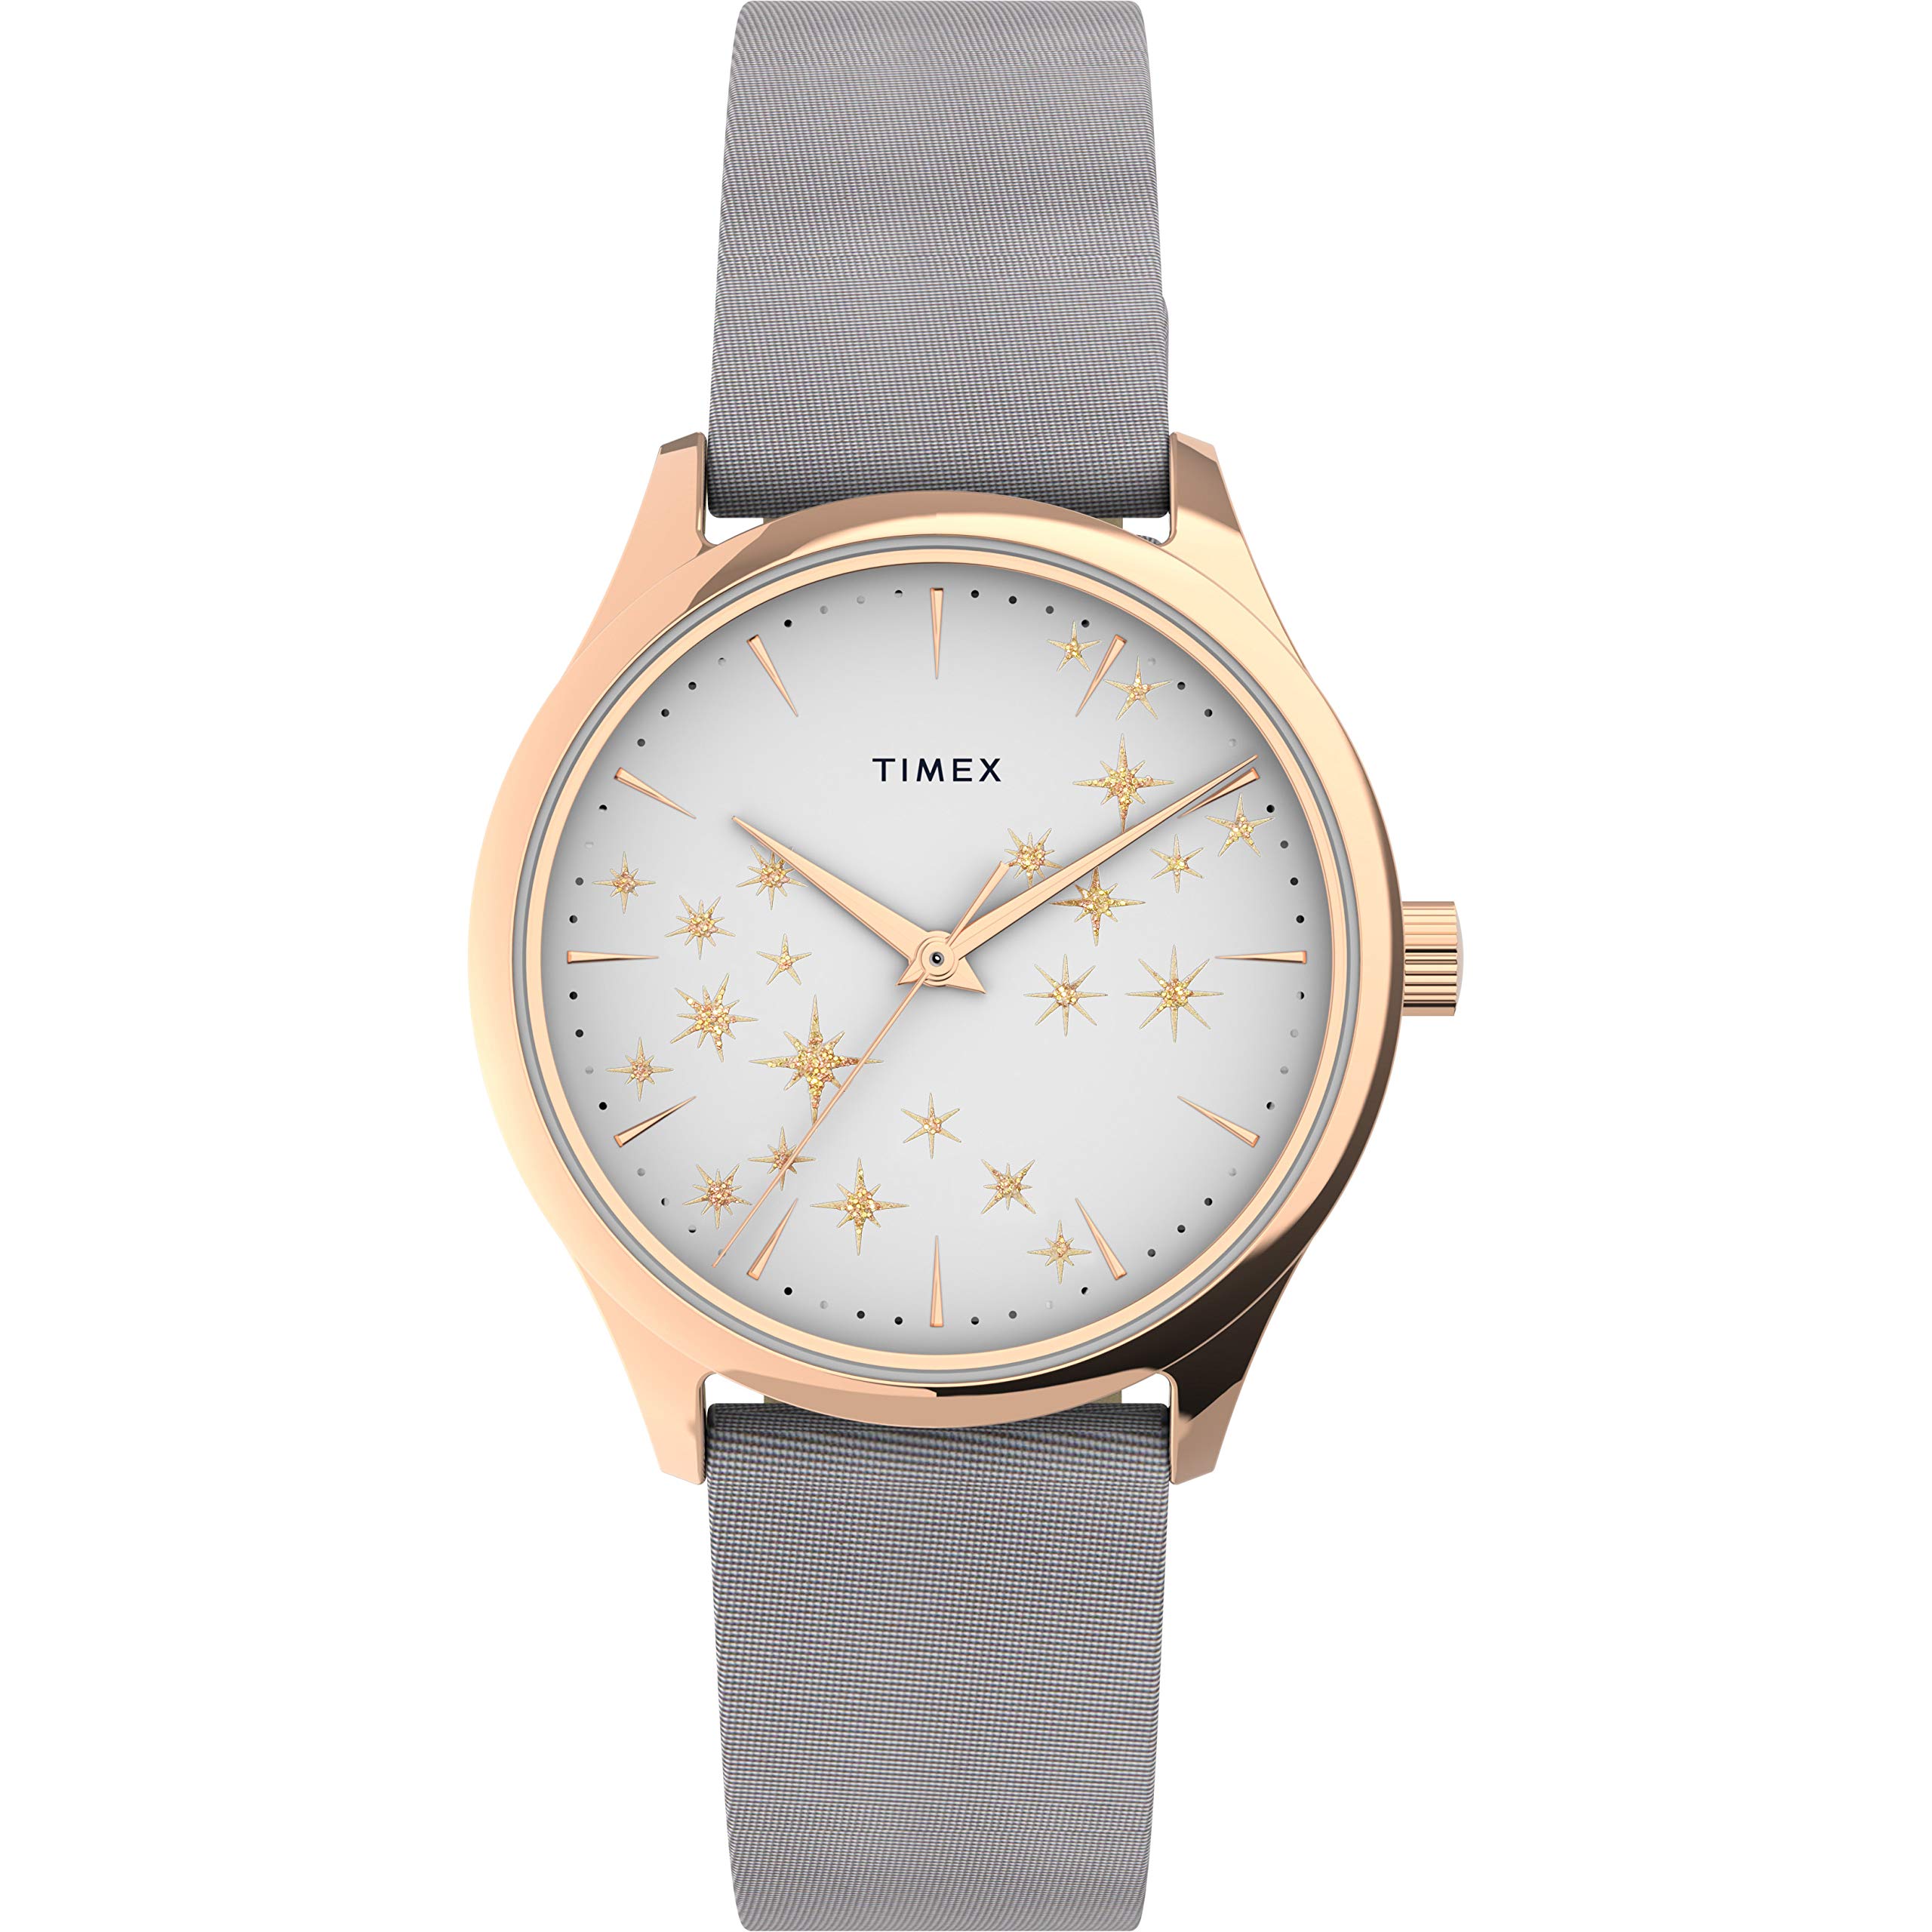 Timex Womens Starstruck 32mm Watch - Rose gold-Tone case White Dial with gray Leather Strap